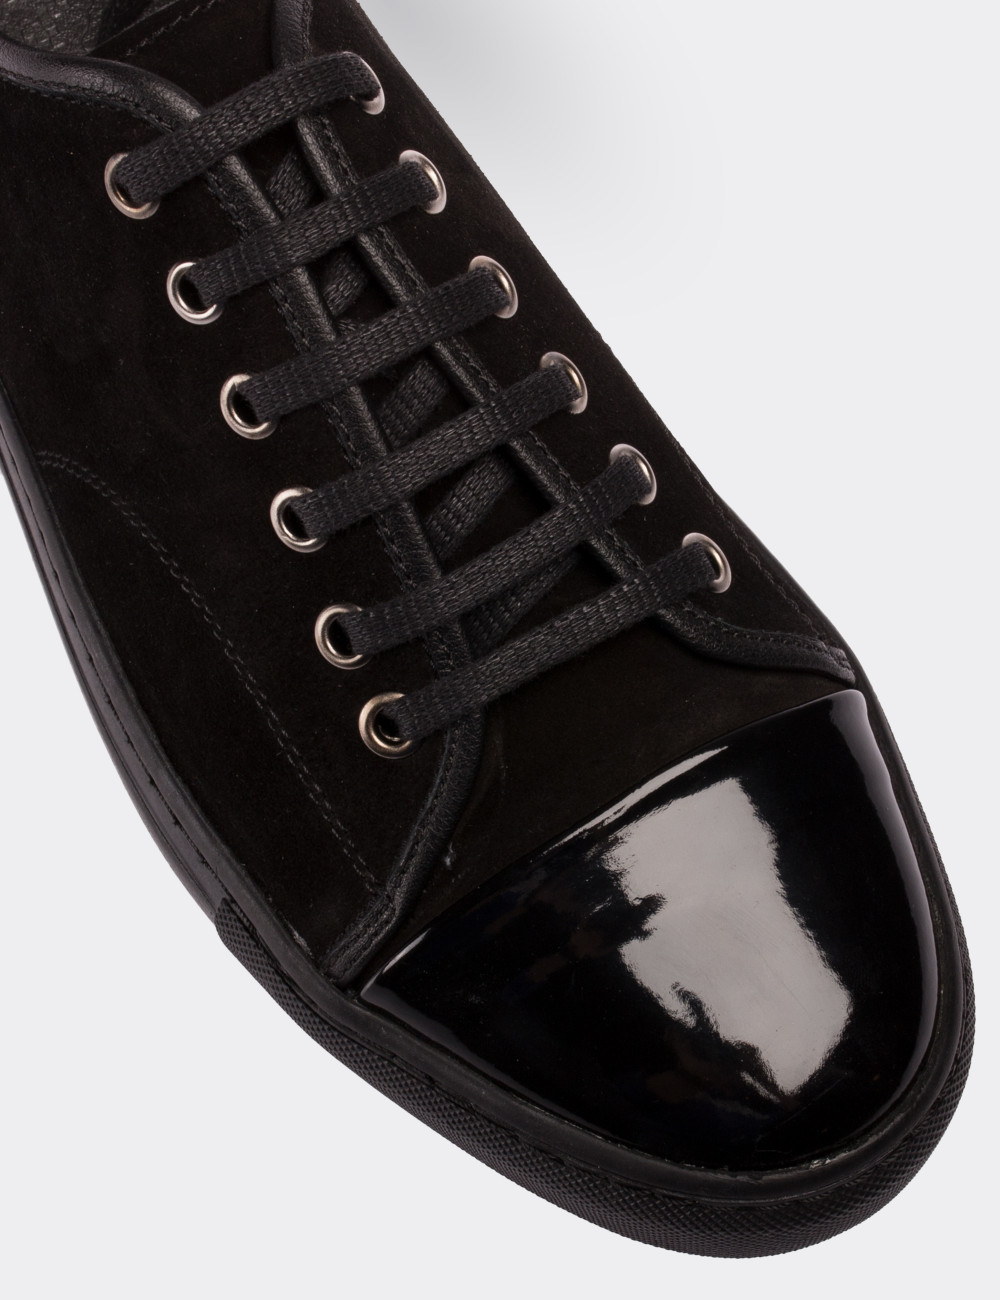 Black Suede Leather Sneakers - 01683MSYHC01